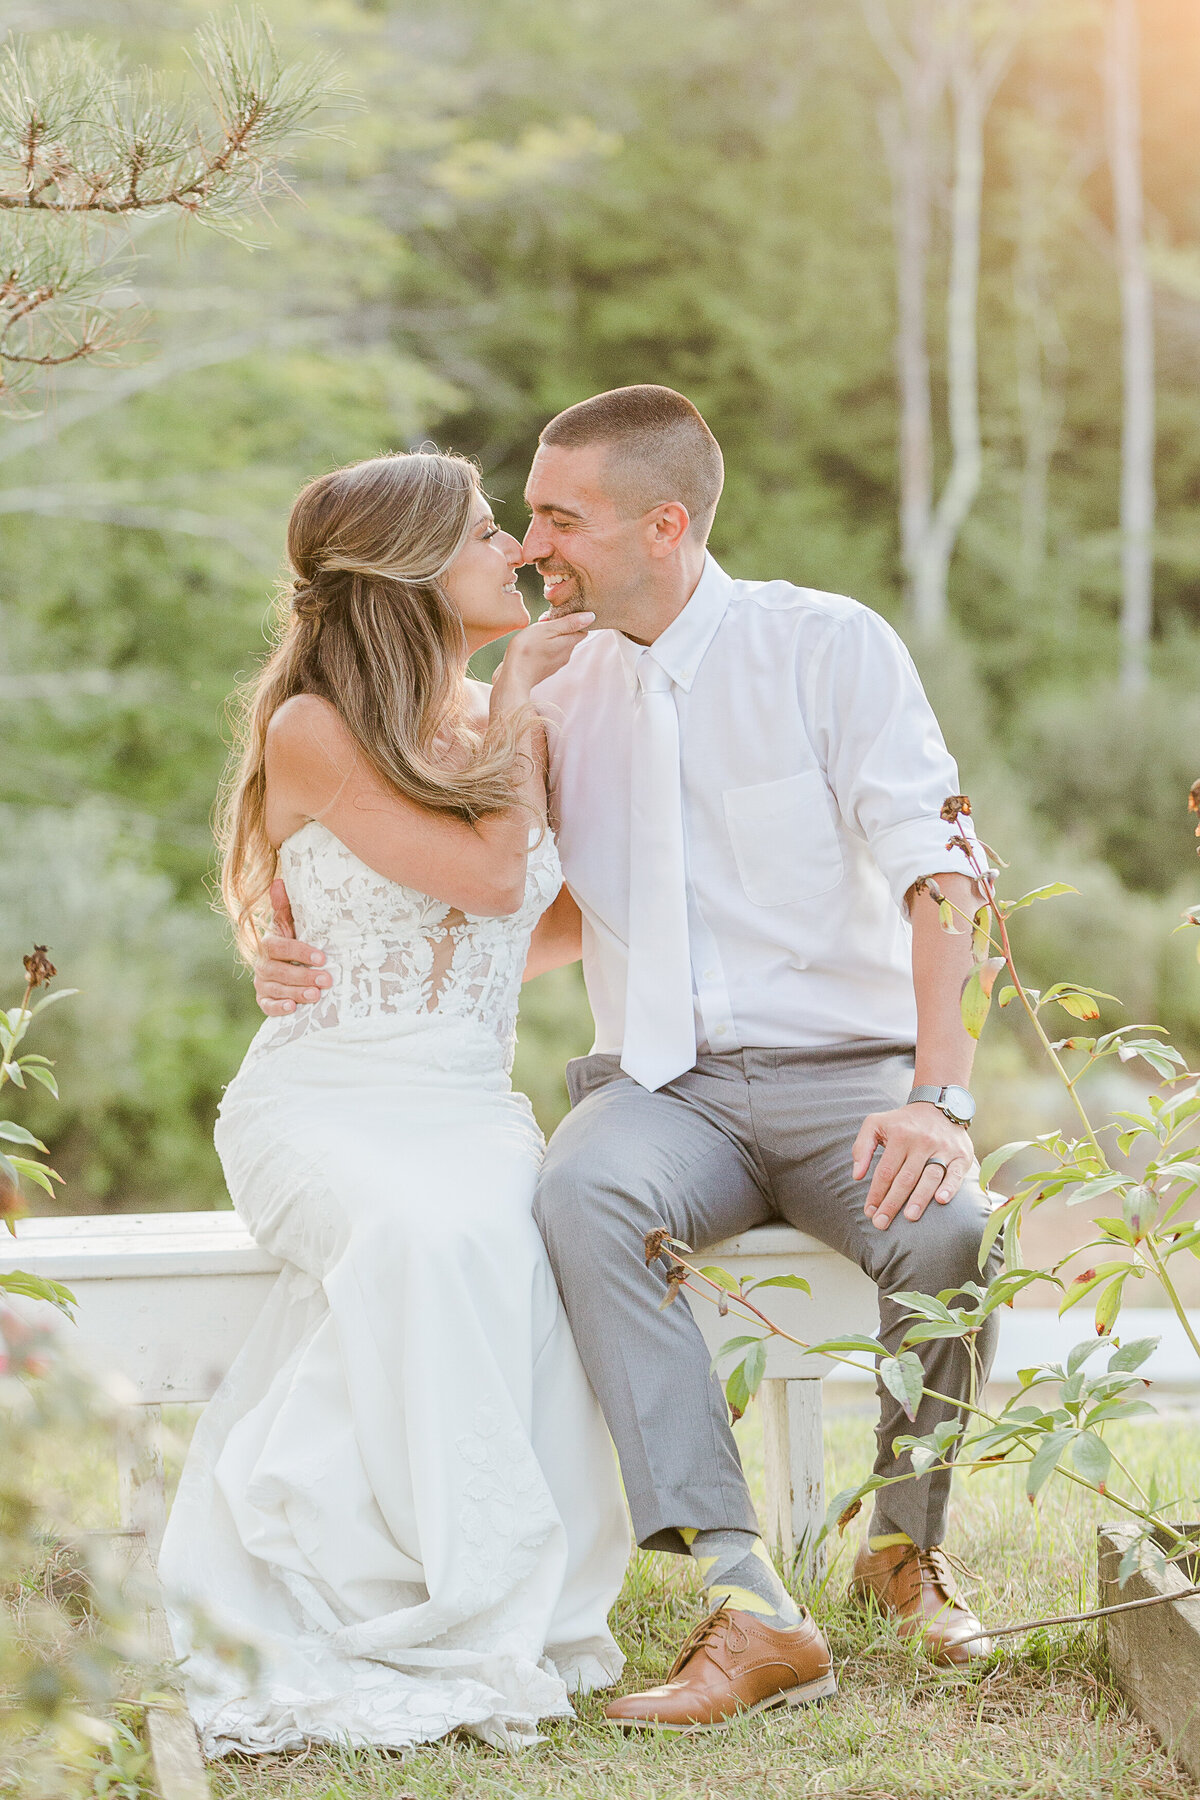 Bride and groom sneak away for a moment at their wedding reception. They are sitting on a bench at the Five Bridge Inn. The bride is lifting the groom's chin and bring him in for a kiss as they are smiling. Captured by best Massachusetts wedding photographer Lia Rose Weddings.